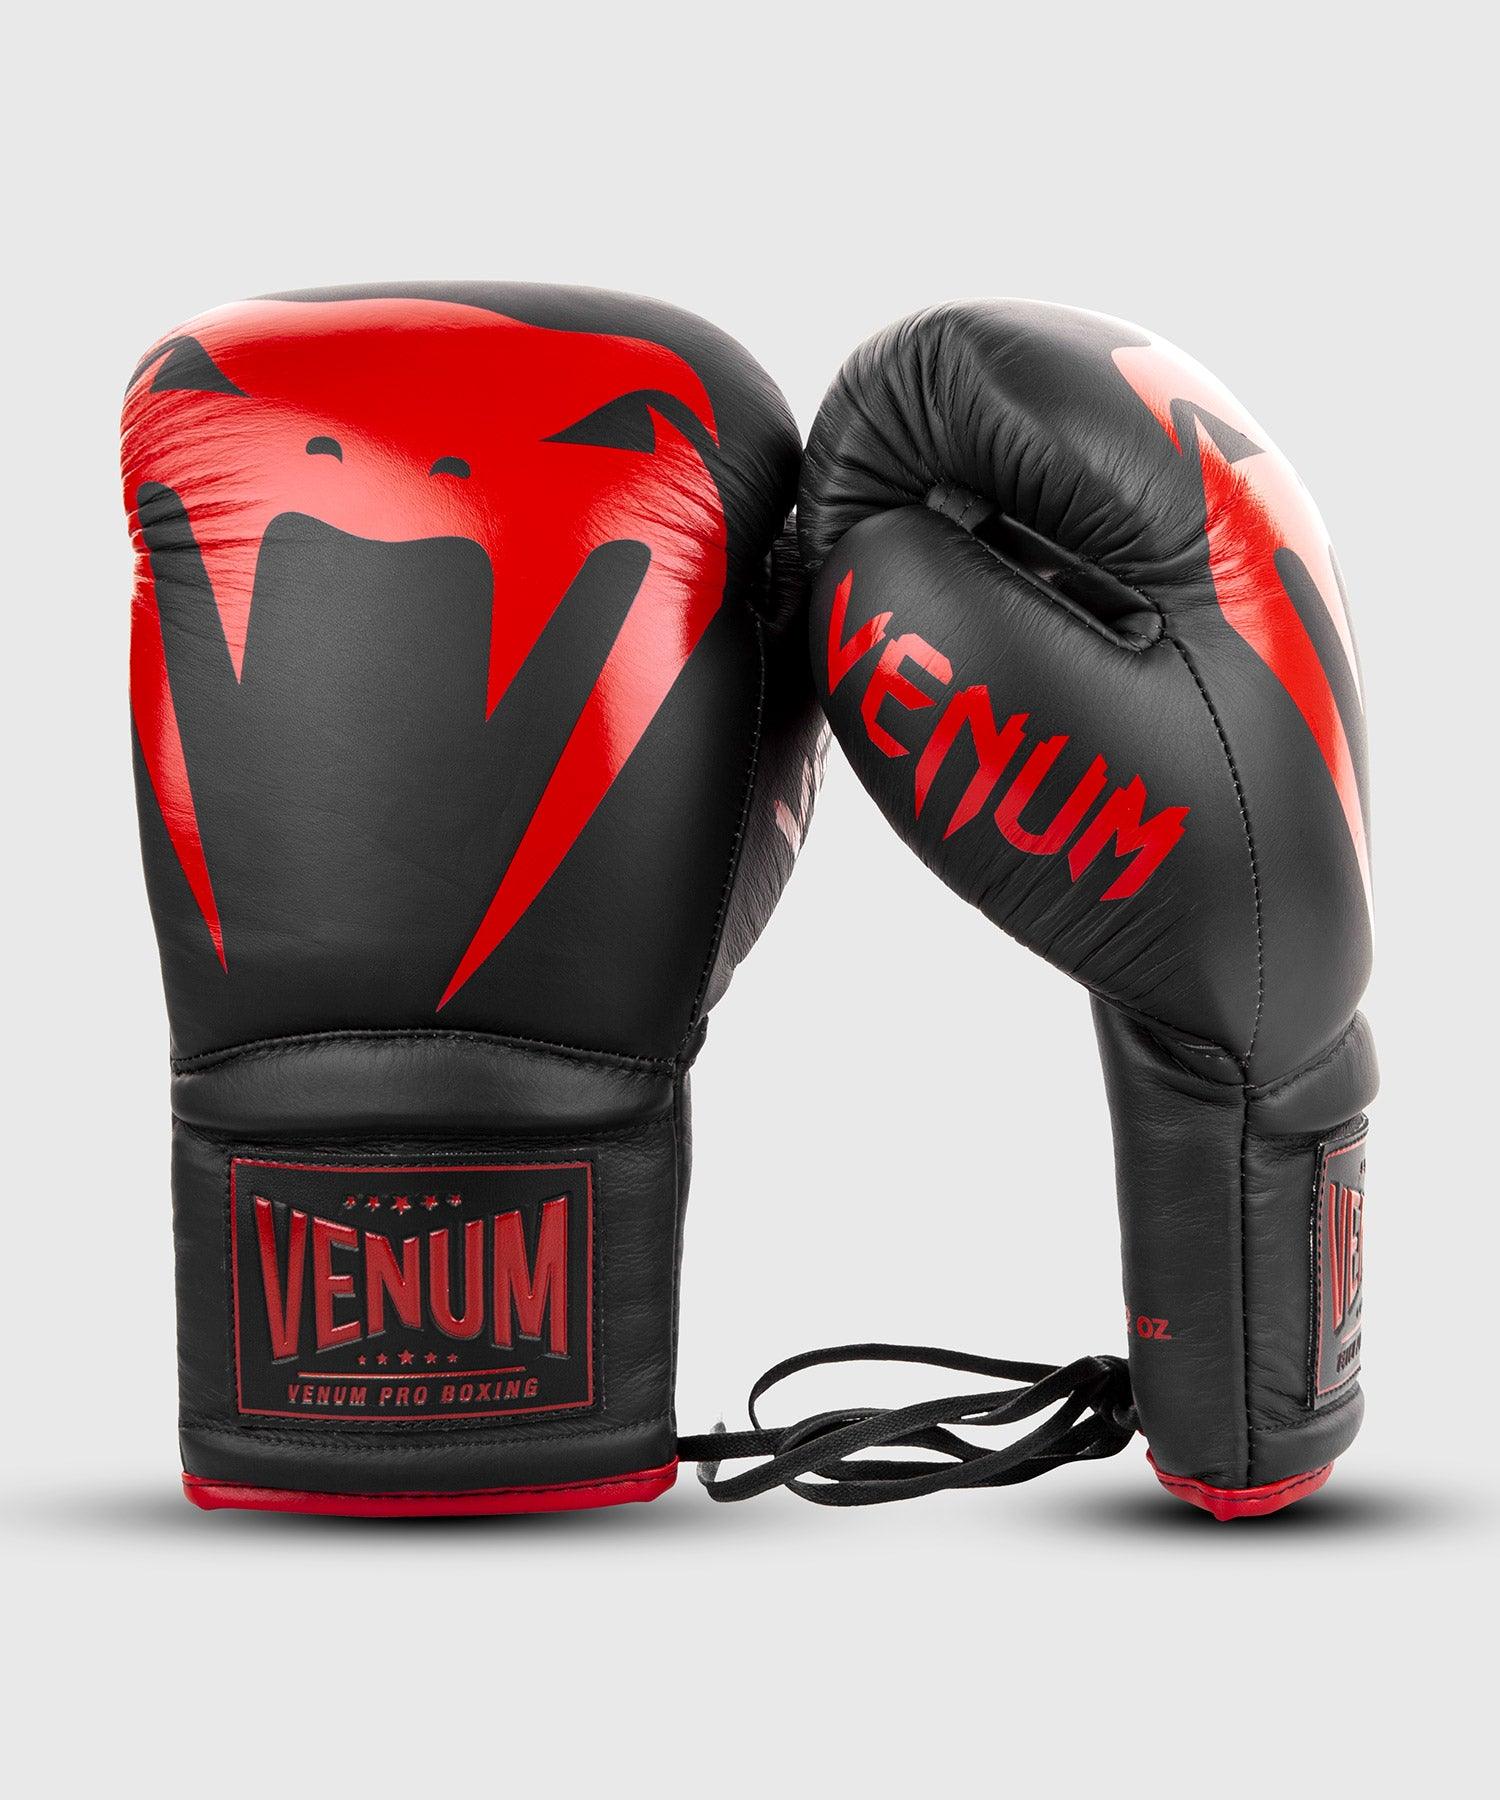 Venum Giant 2.0 Pro Boxing Gloves - With Laces - Black/Red Picture 2